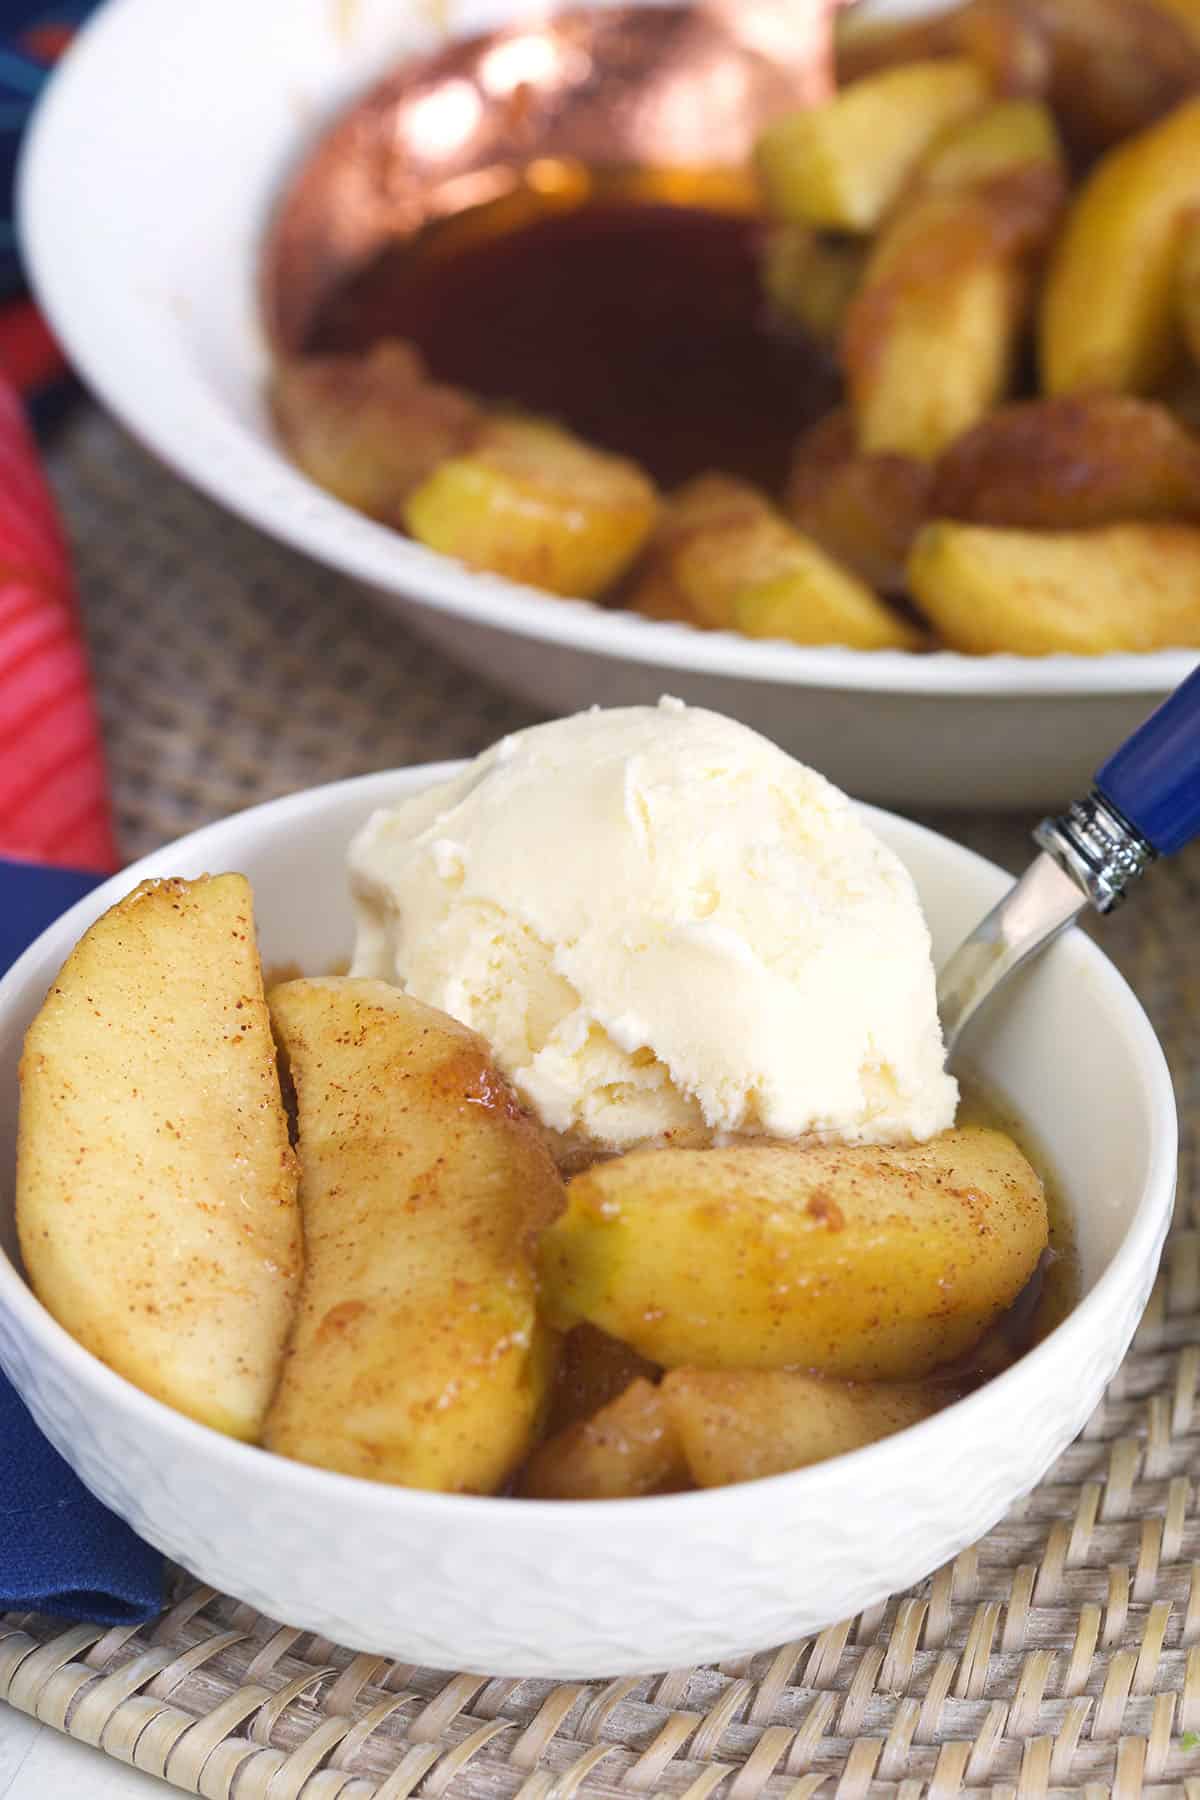 A scoop of ice cream is placed on top of fried apples in a bowl.